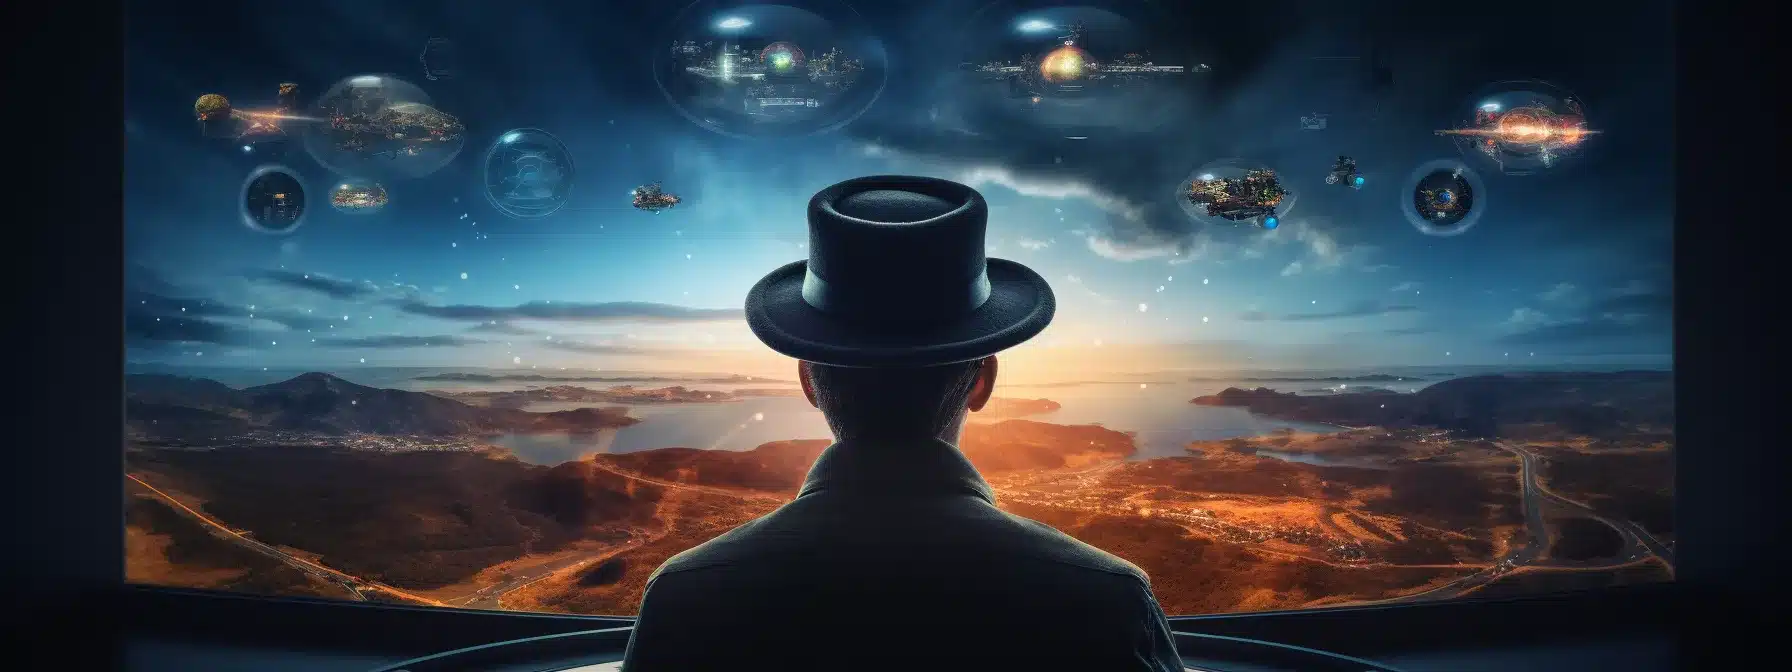 A Person Wearing A Captain'S Hat Looking Through A Spyglass Towards A Futuristic Landscape With Ai Symbols And Icons Floating In The Air.